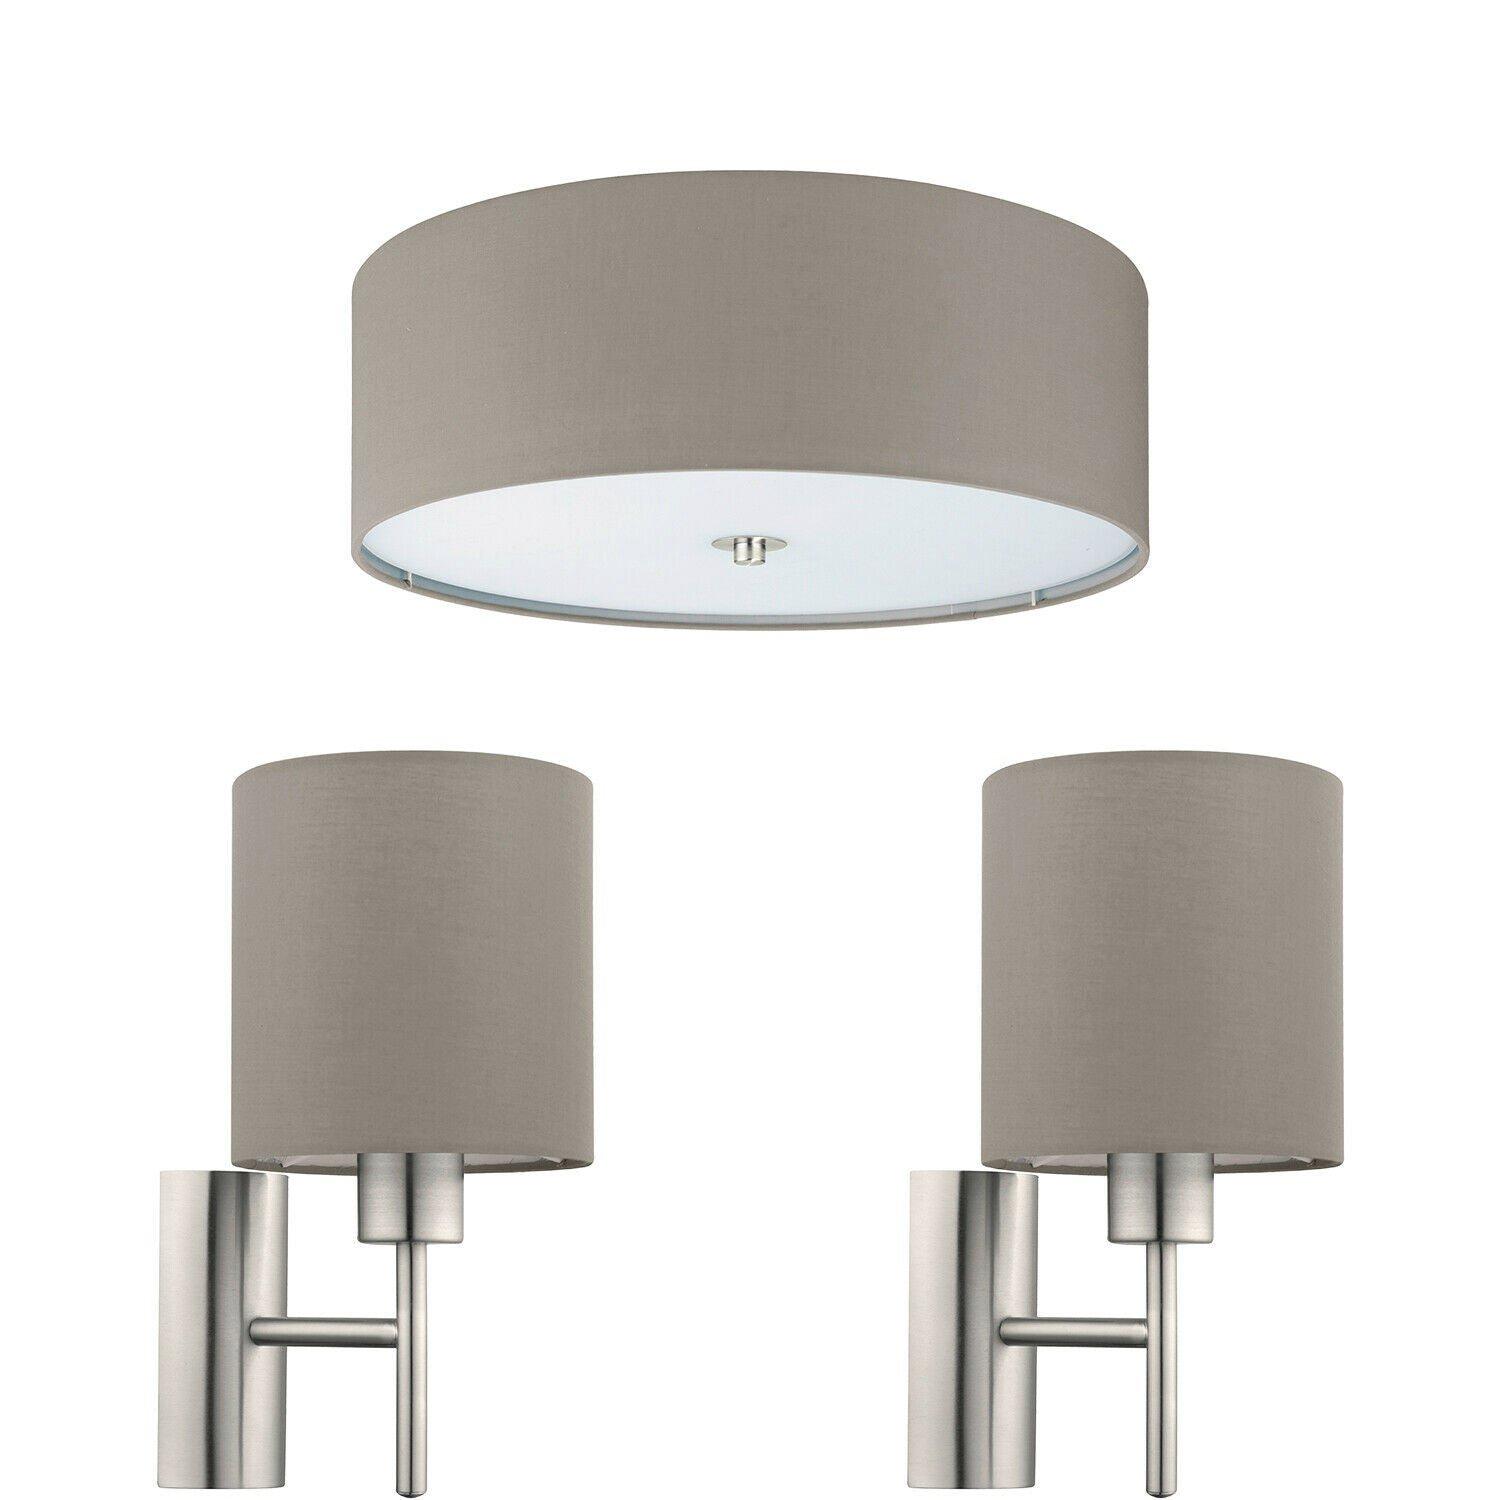 Low Ceiling Light & 2x Matching Wall Lights Taupe Fabric Round Shade Lamp